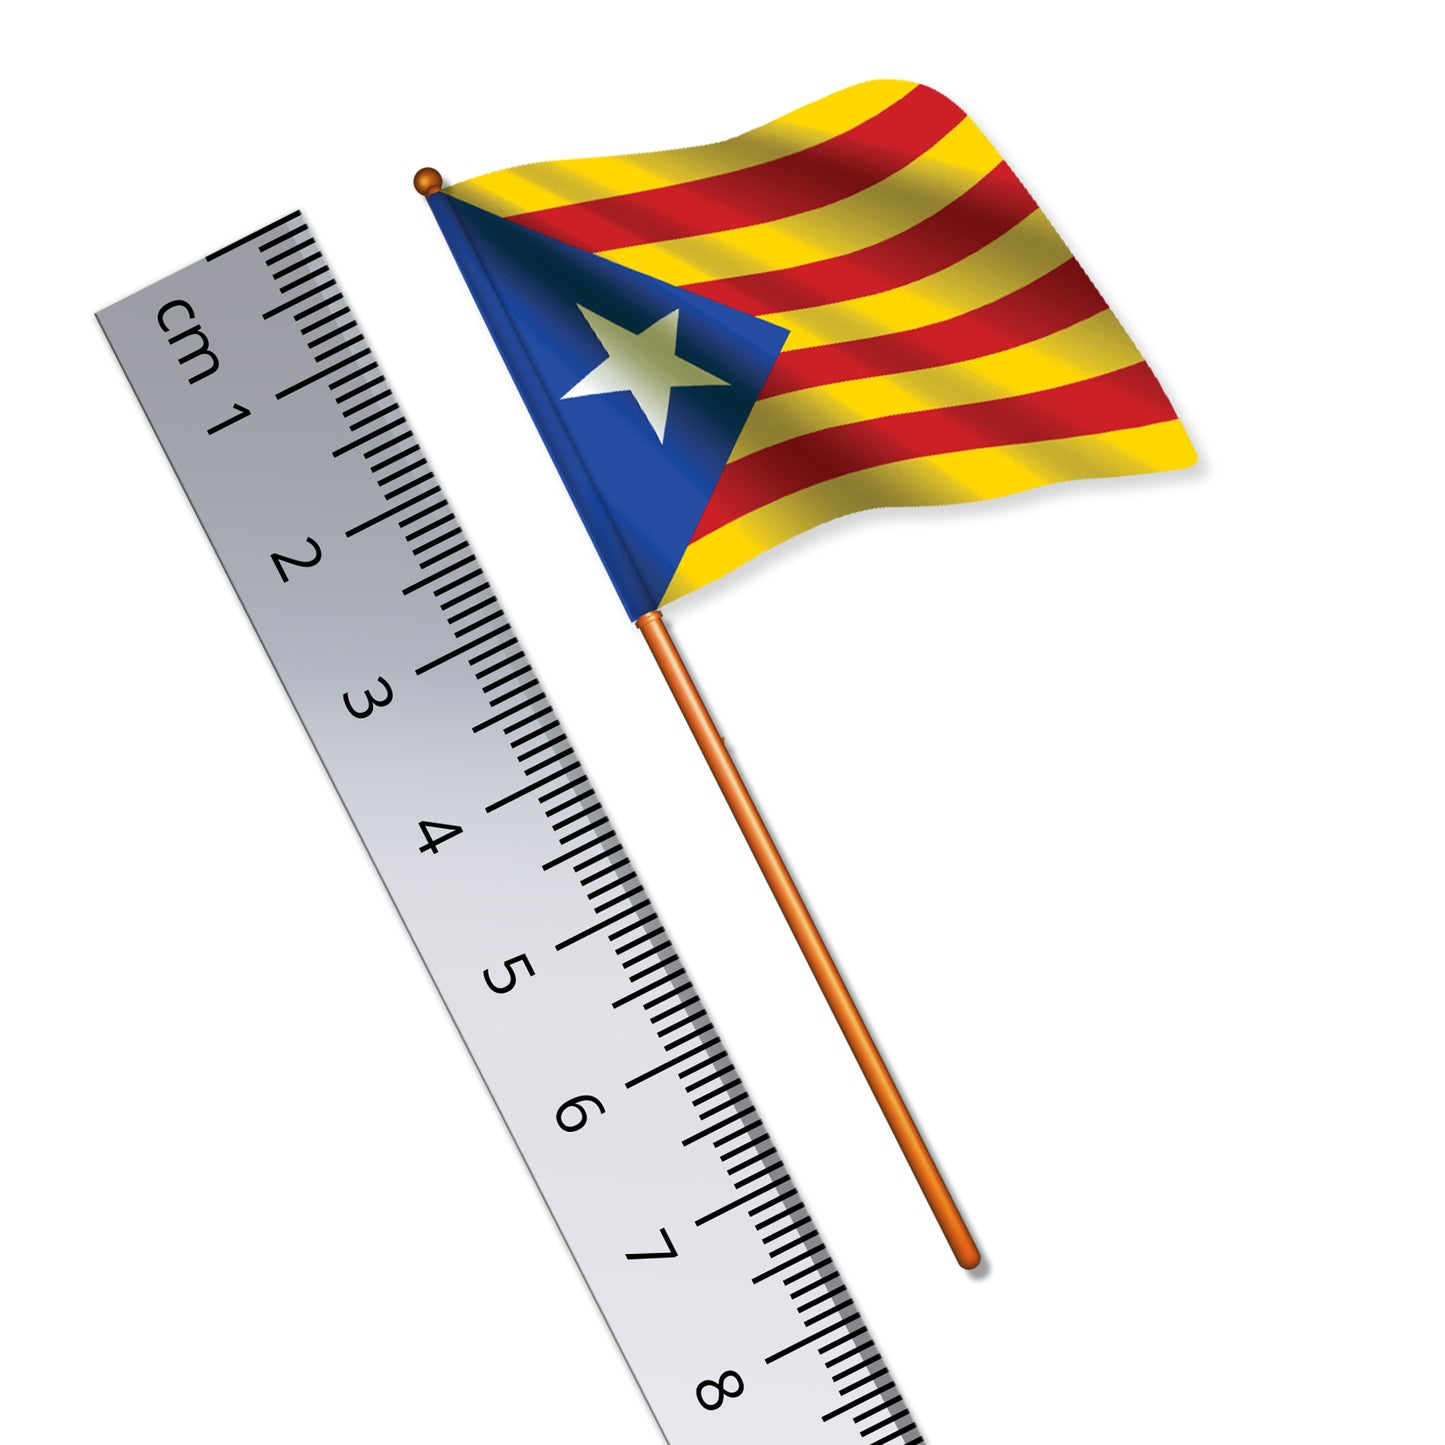 Catalan Independence Flag